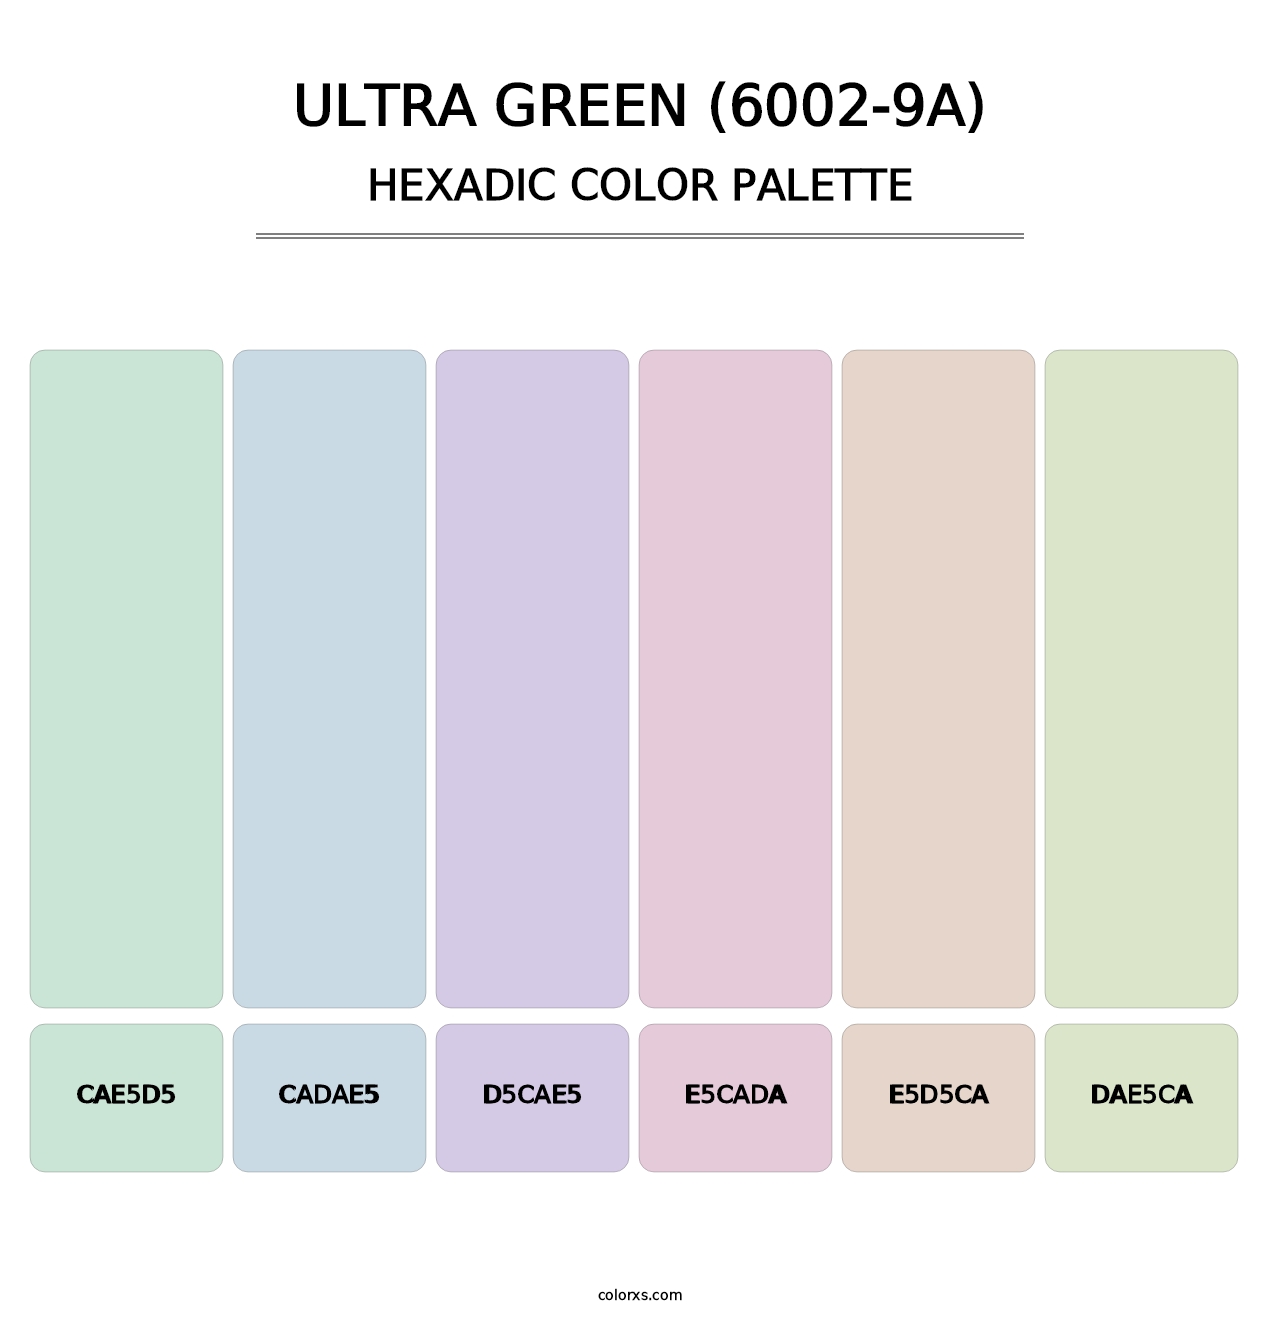 Ultra Green (6002-9A) - Hexadic Color Palette